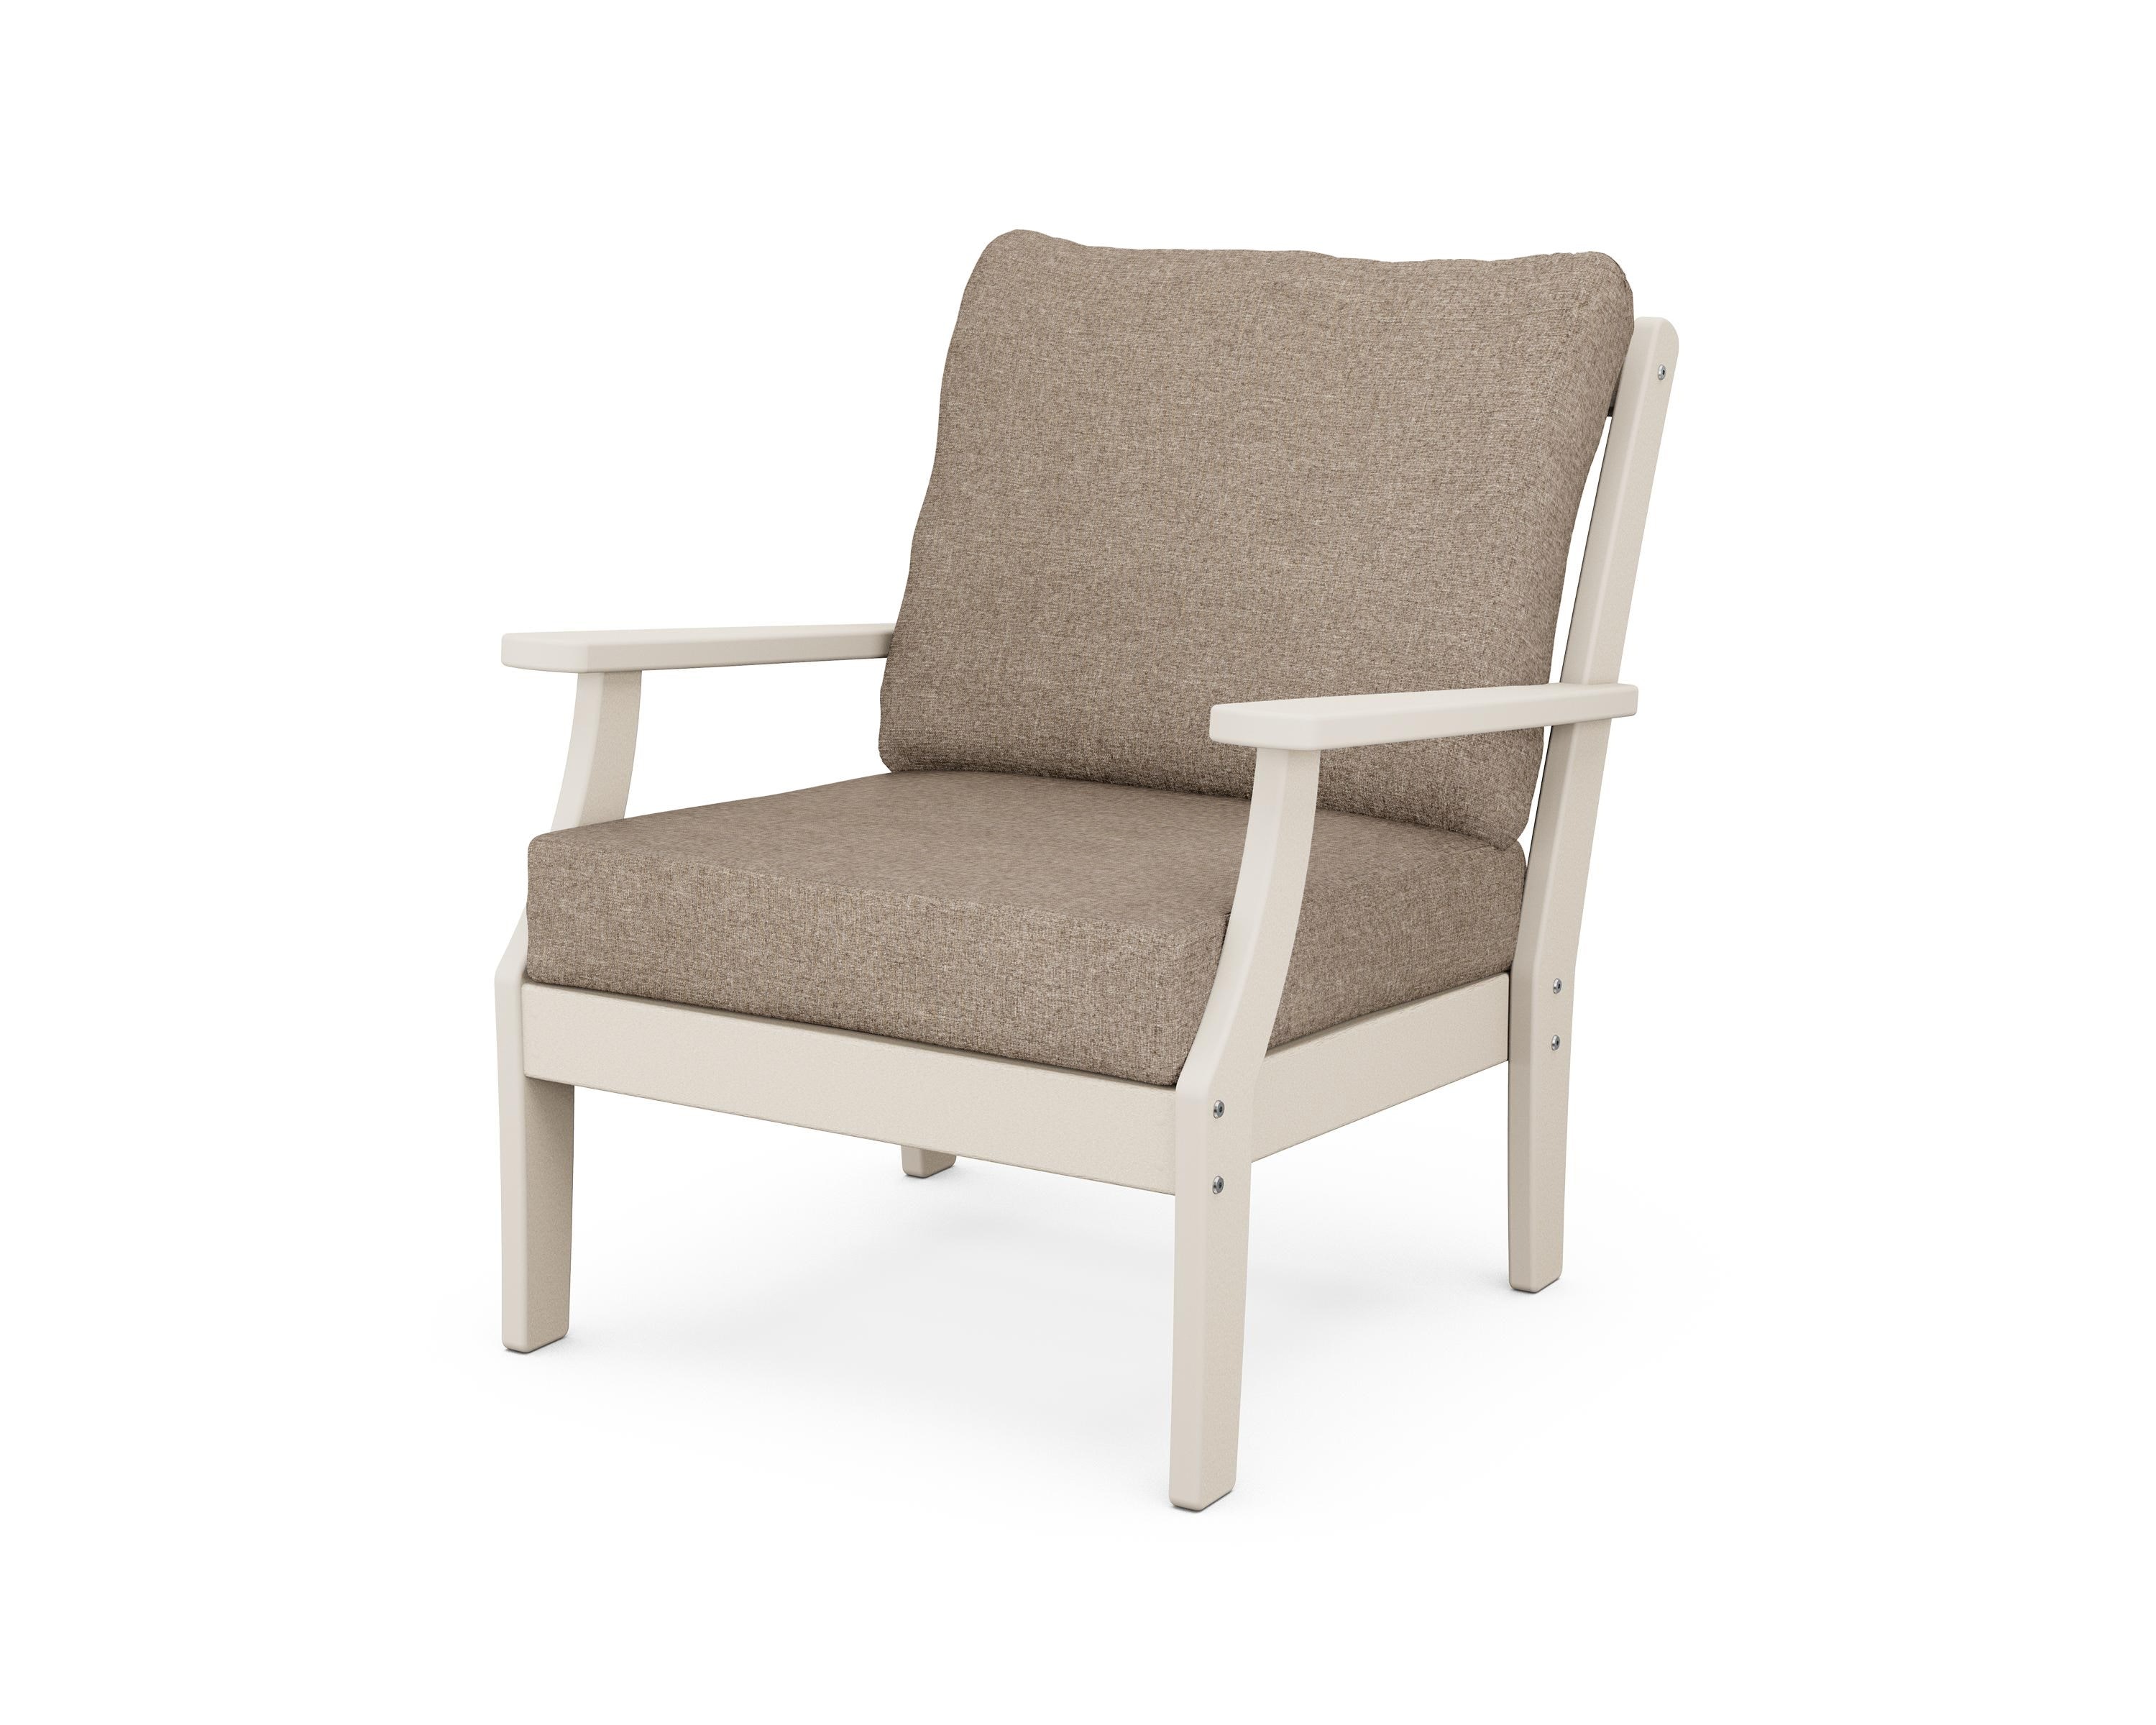 Trex Outdoor Furniture Yacht Club Deep Seating Chair